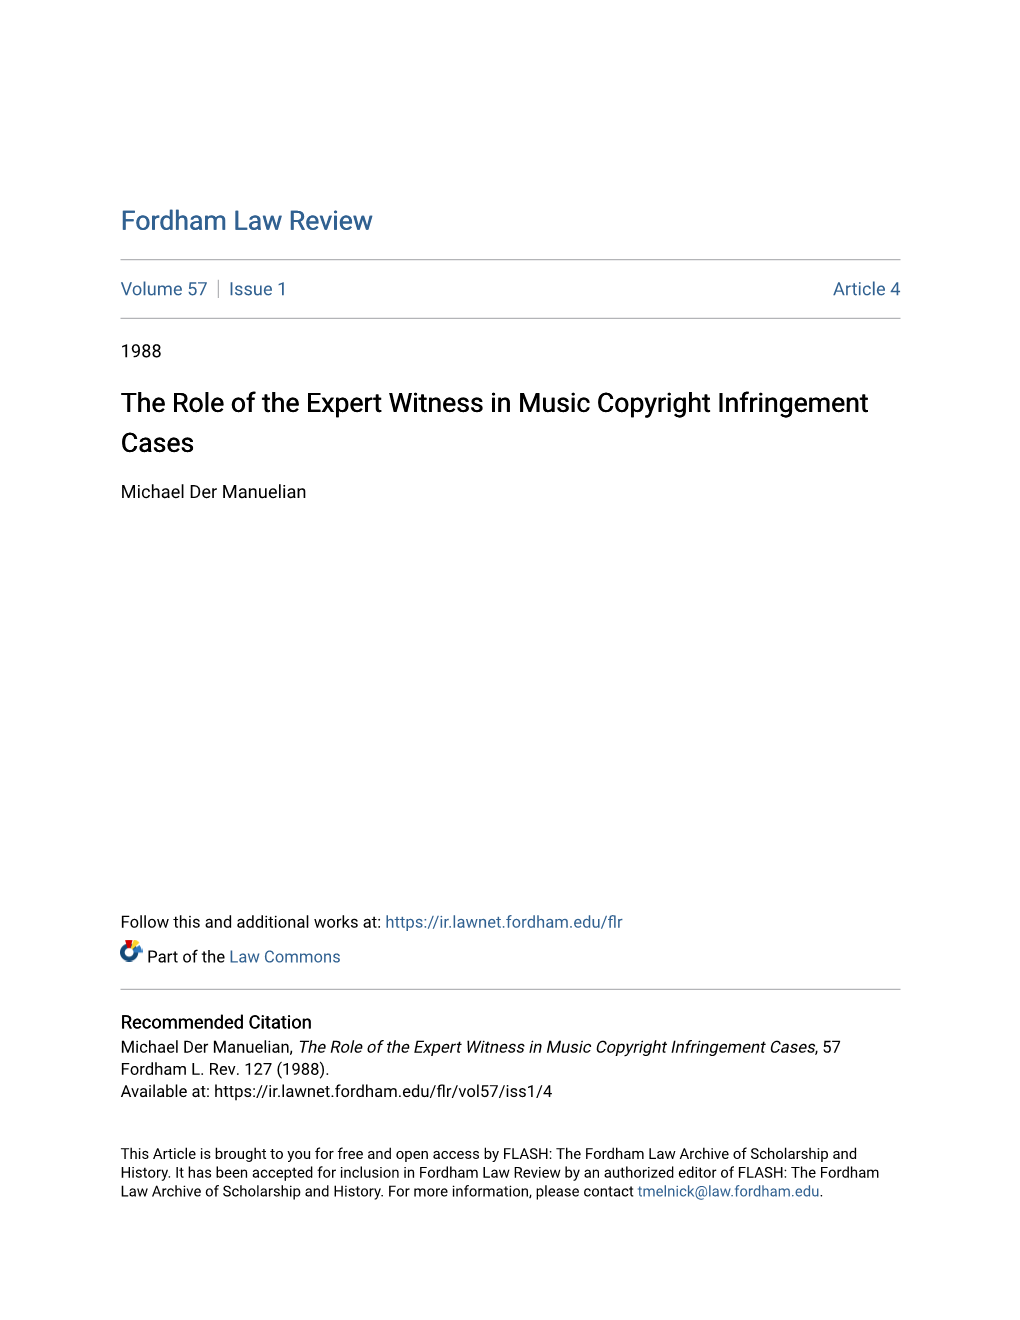 The Role of the Expert Witness in Music Copyright Infringement Cases